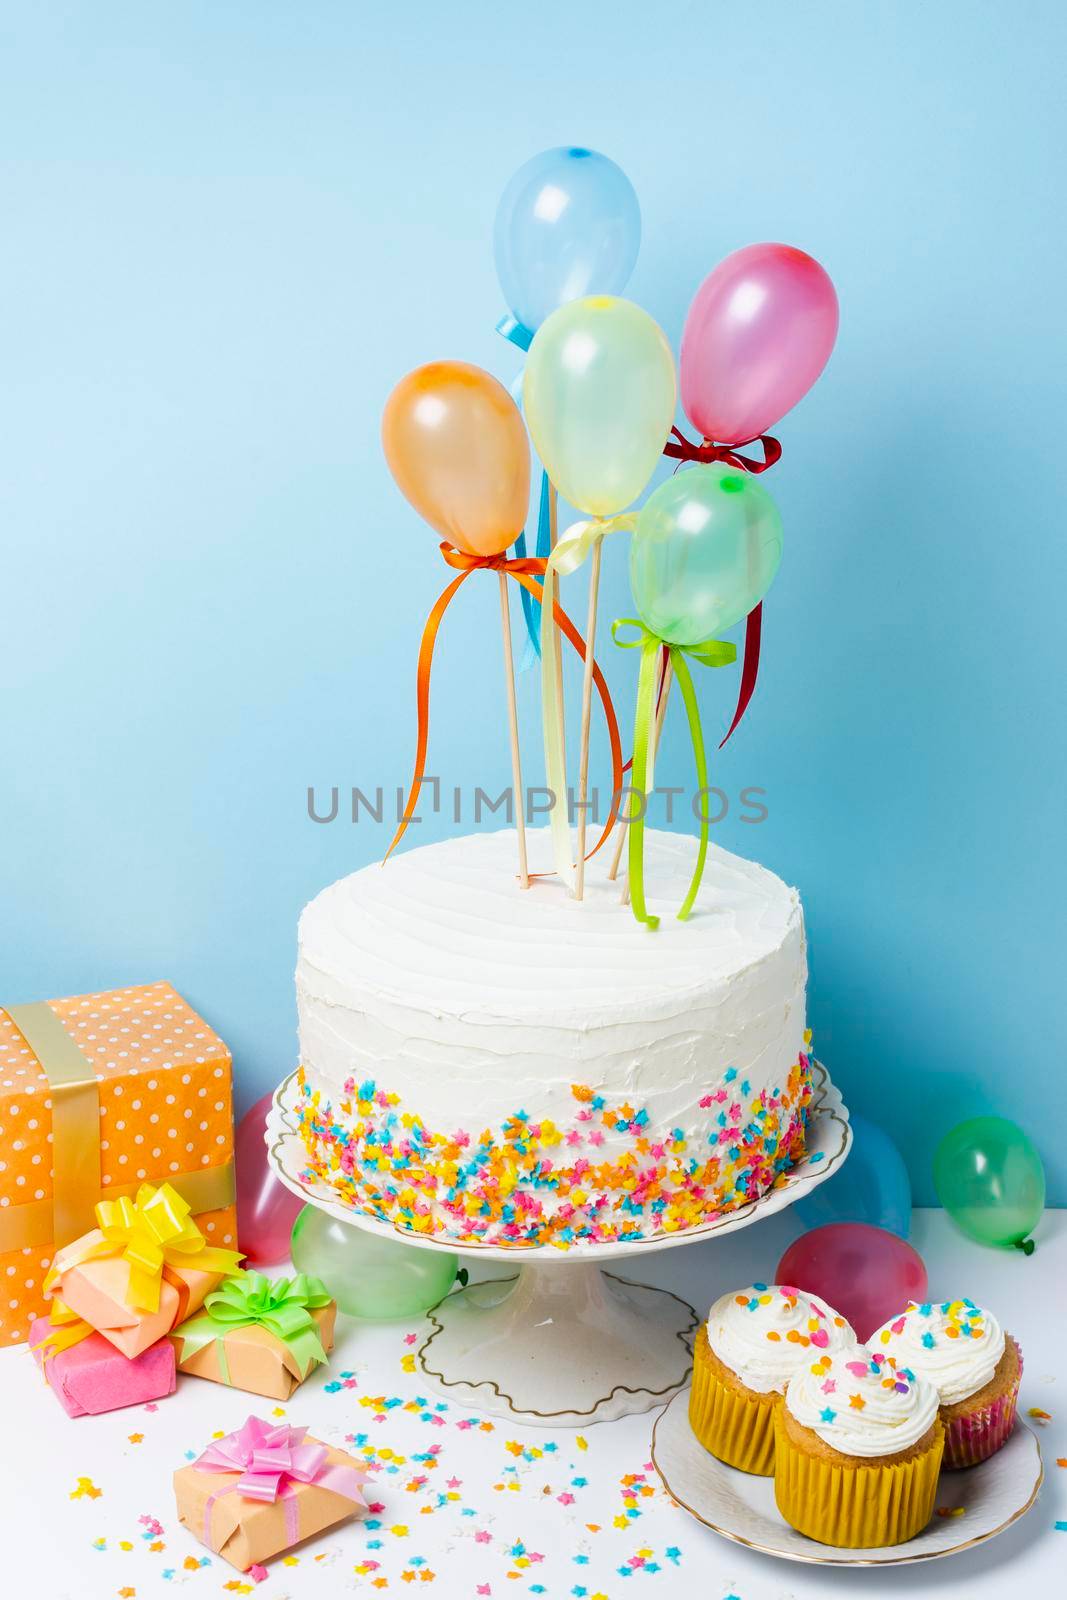 arrangement birthday party concept. High quality photo by Zahard